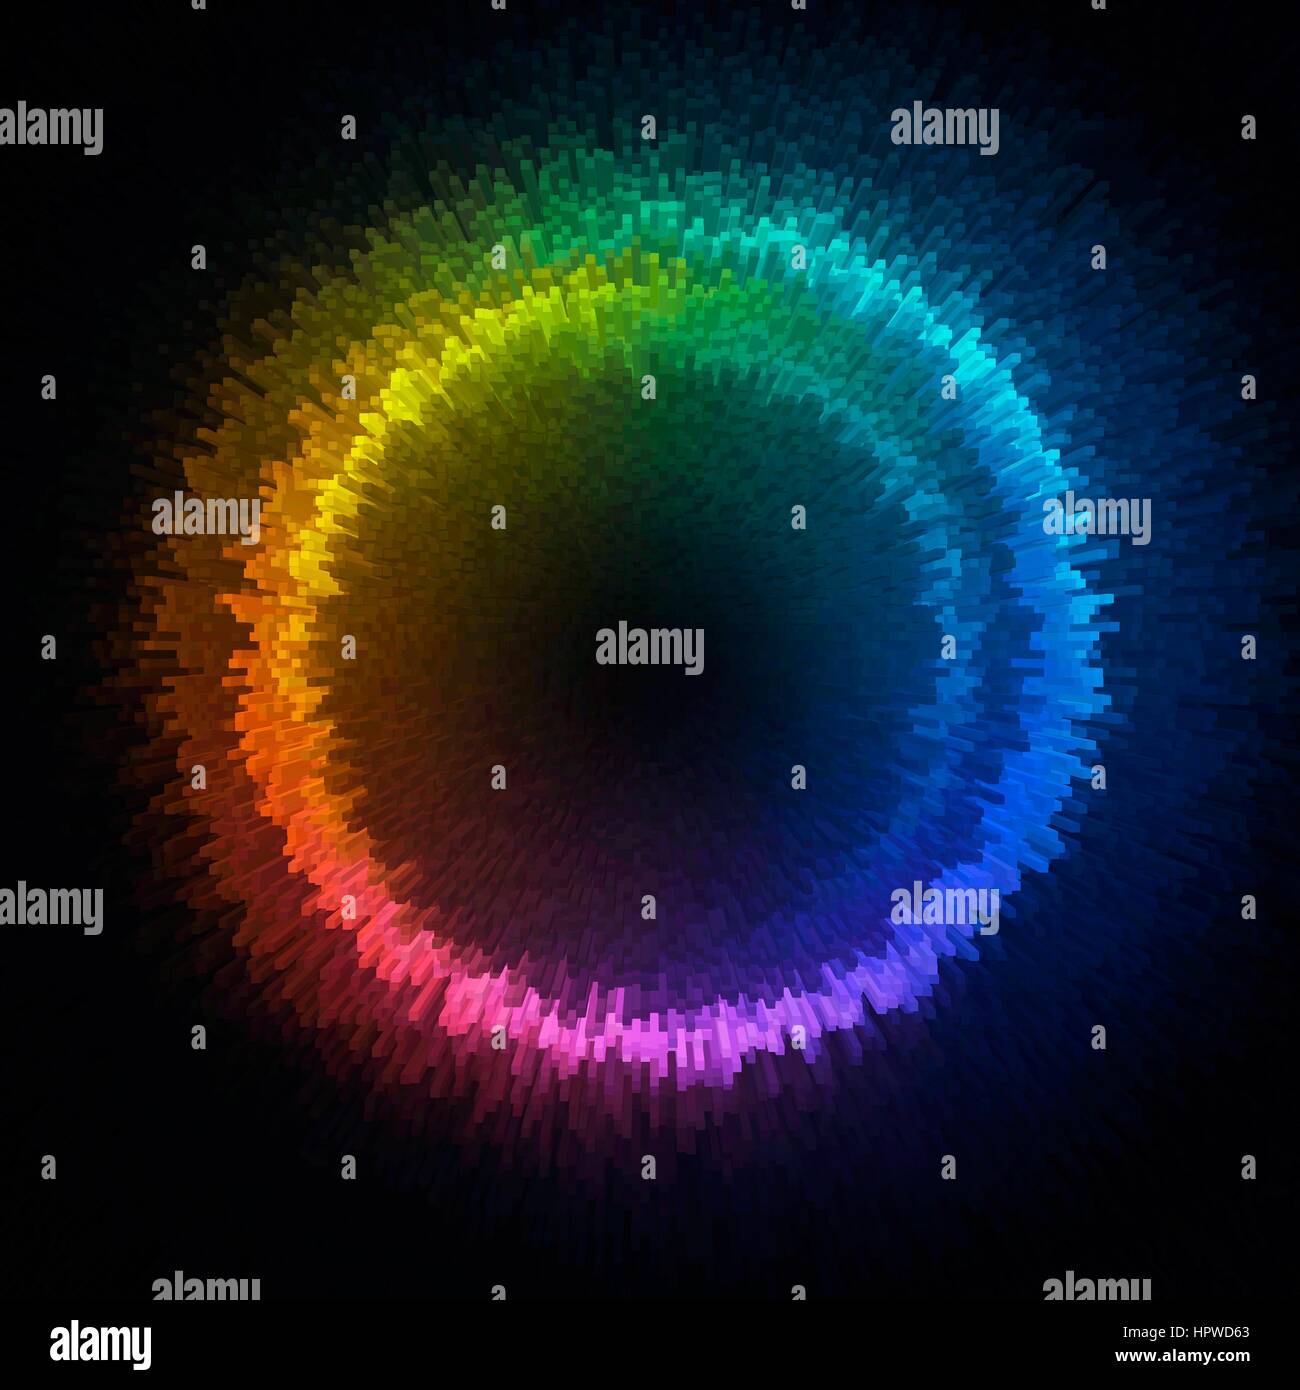 Multicoloured circle, illustration. The colours shown here range across the spectrum of visible colours from red to orange to yellow to green to blue to violet. Stock Photo